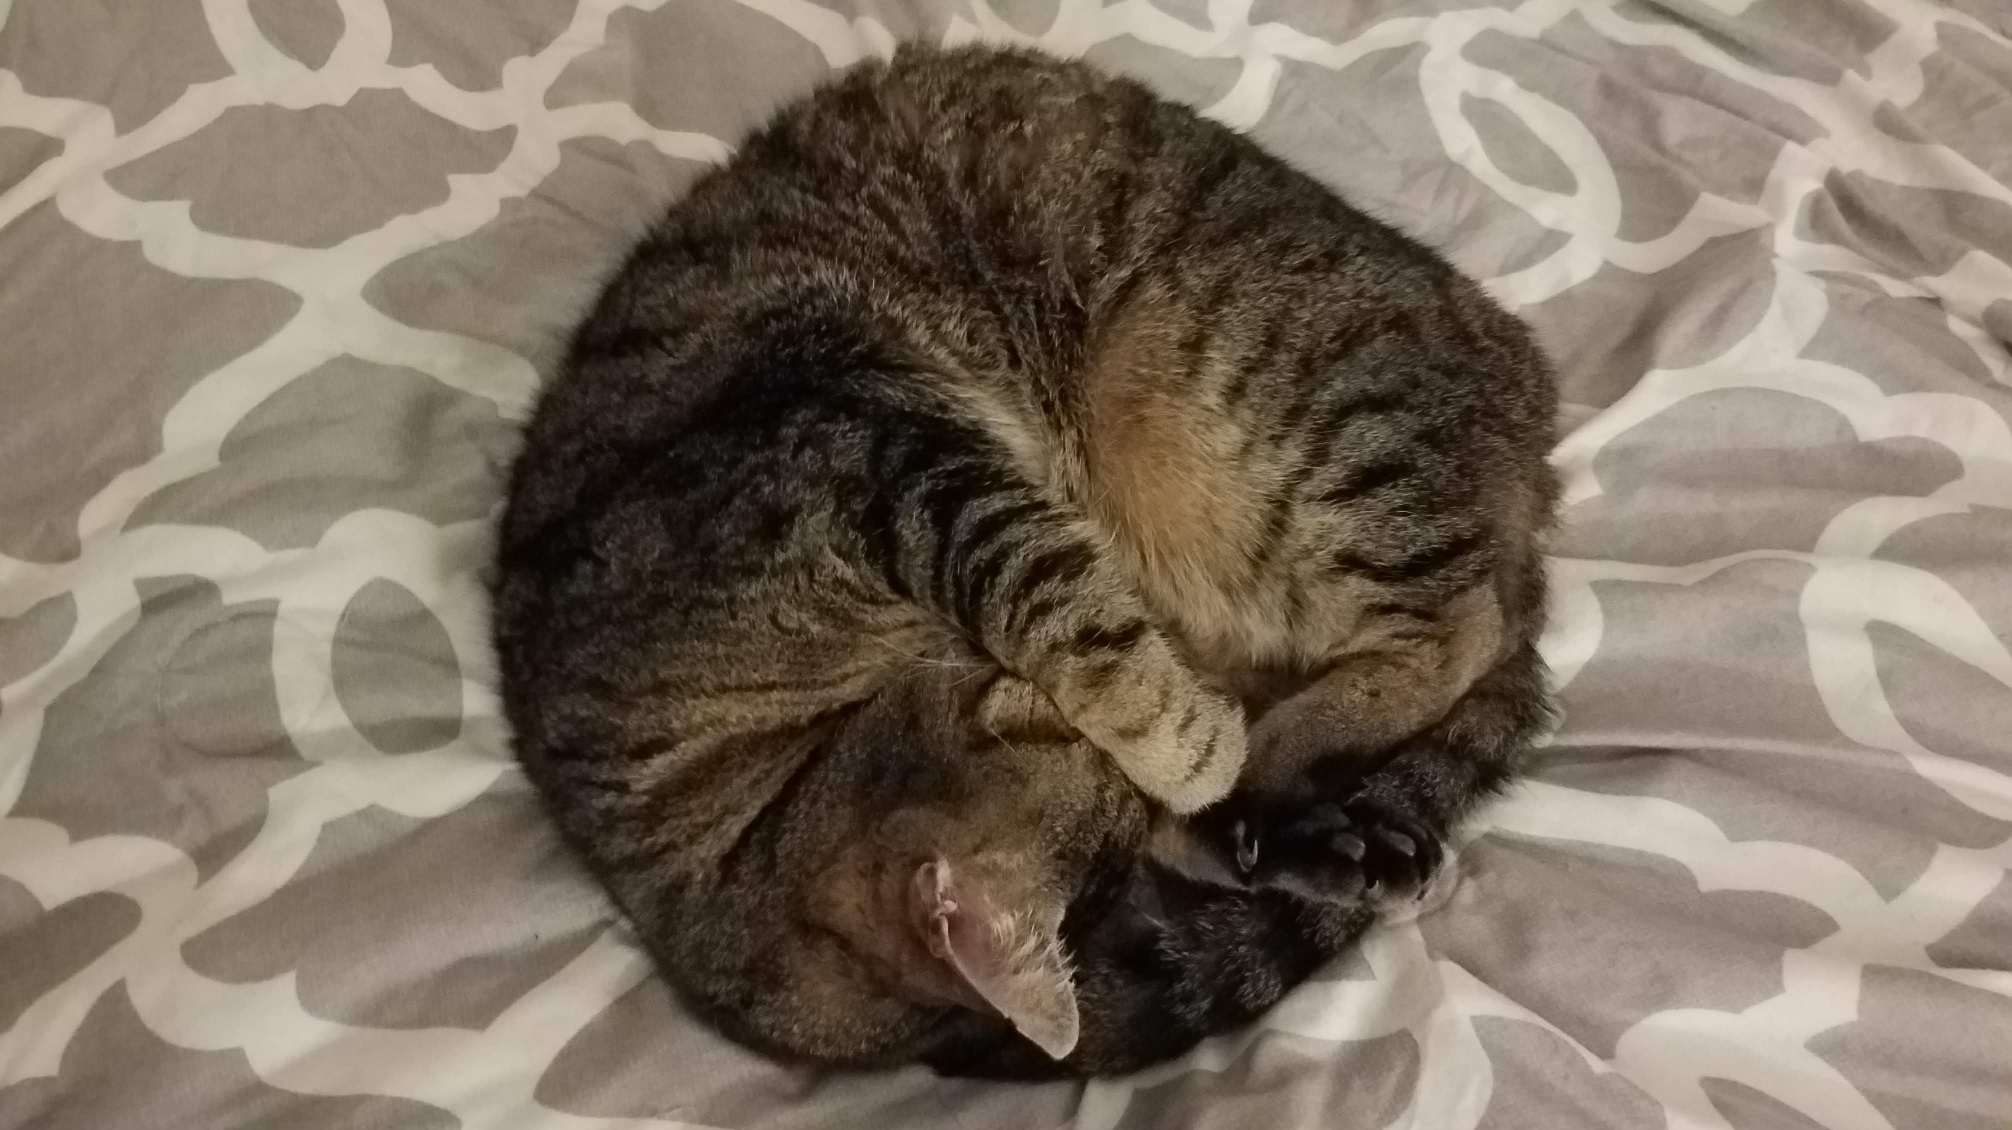 a photo of a stinky little cat, curled up in a nearly perfect circle